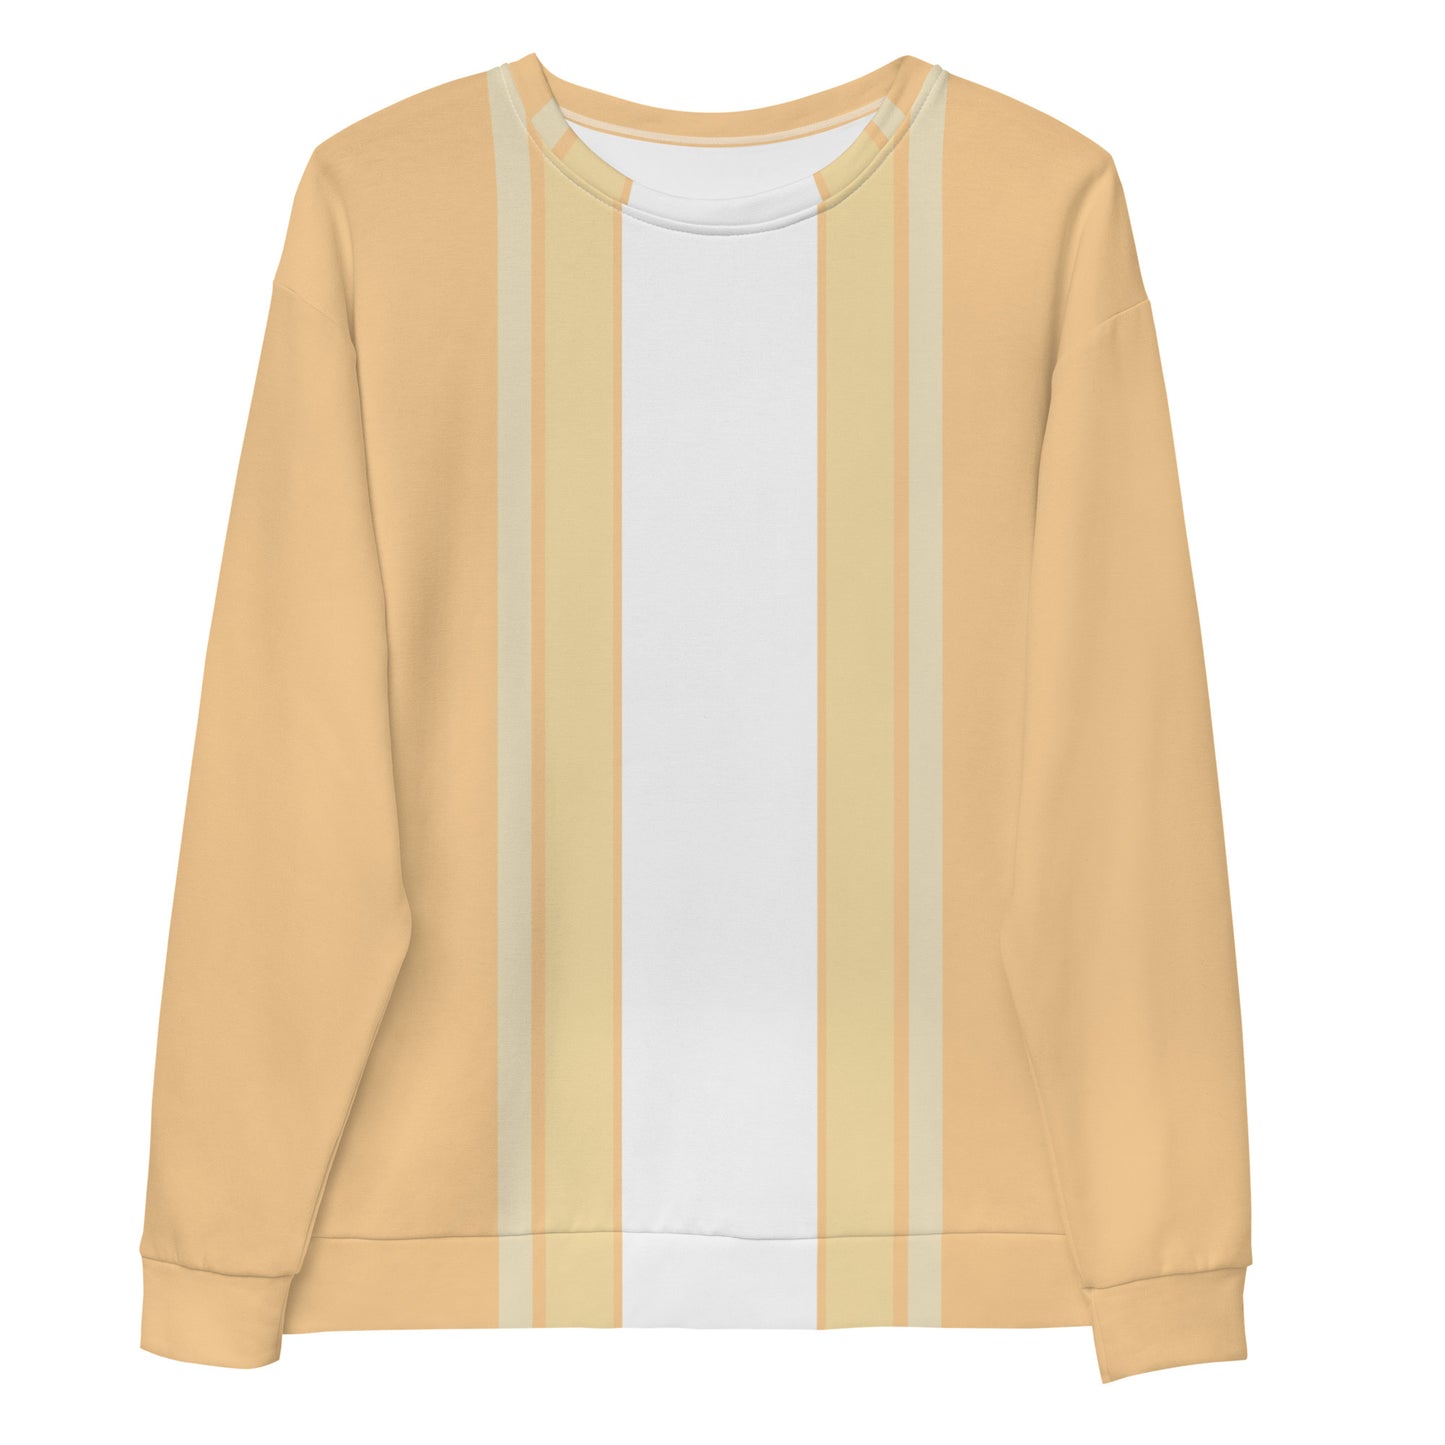 Vertical Lines Peach - Sustainably Made Sweatshirt